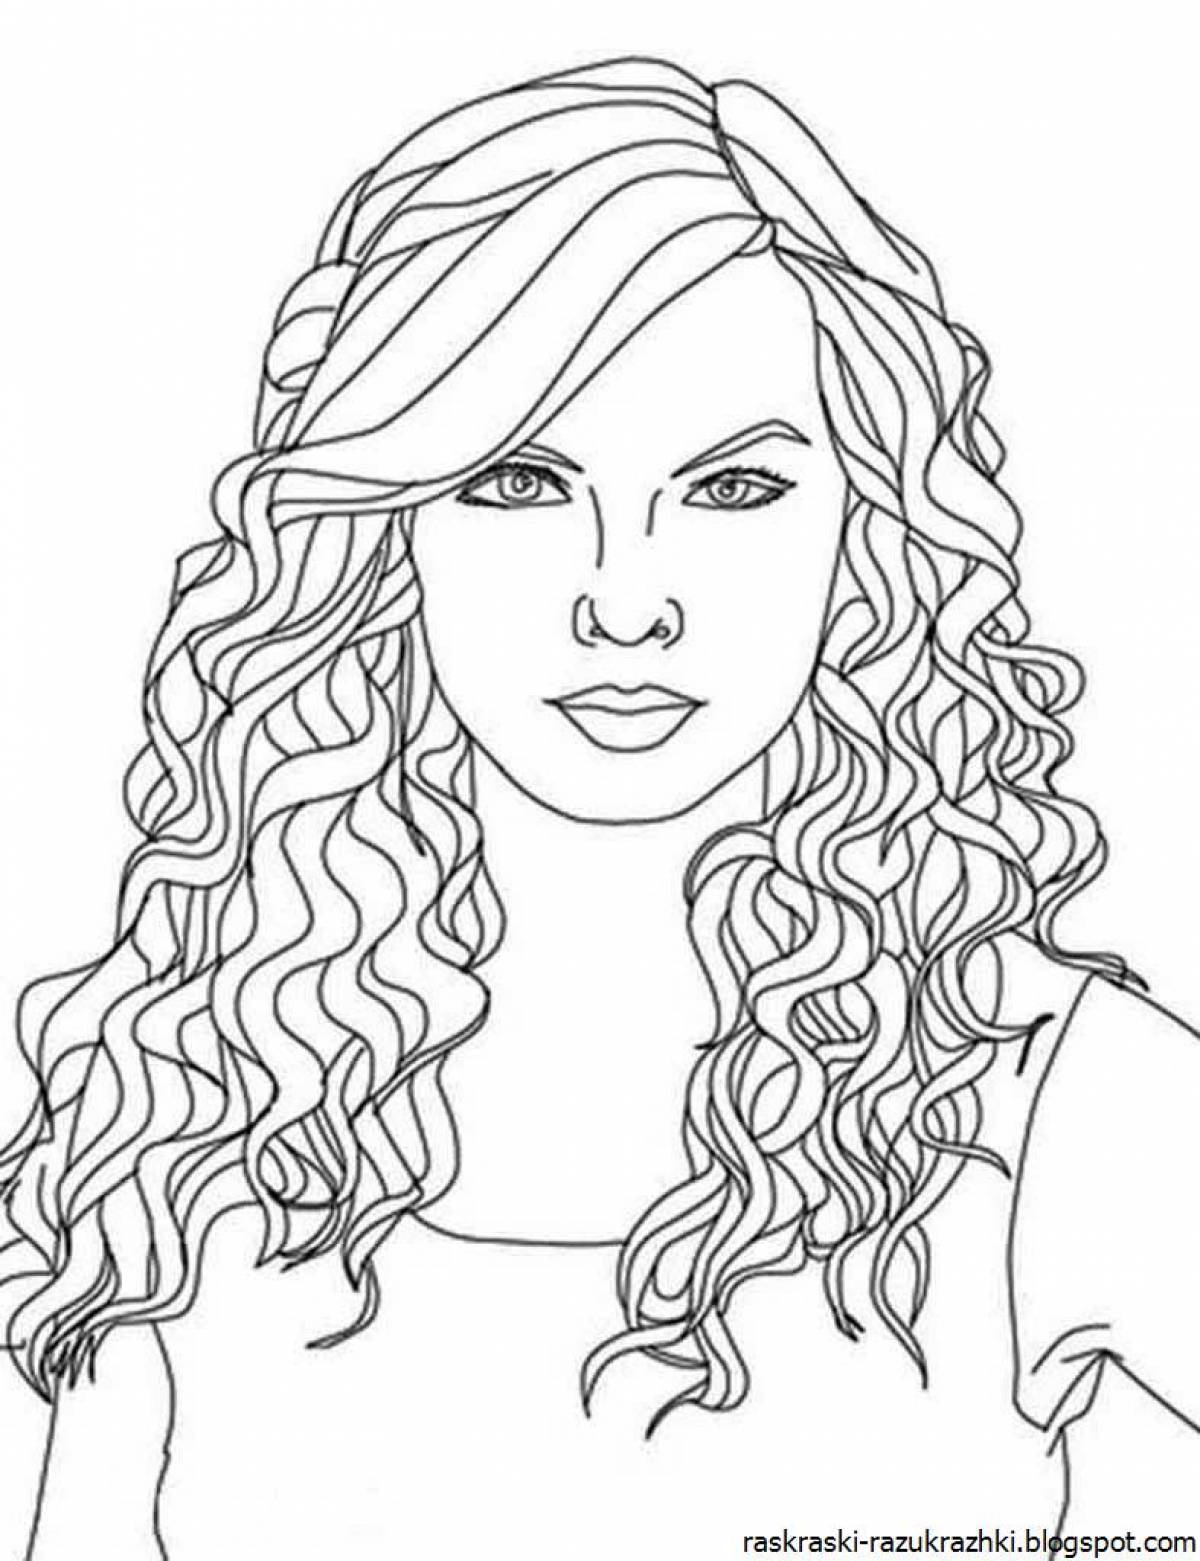 Radiant coloring page people girls